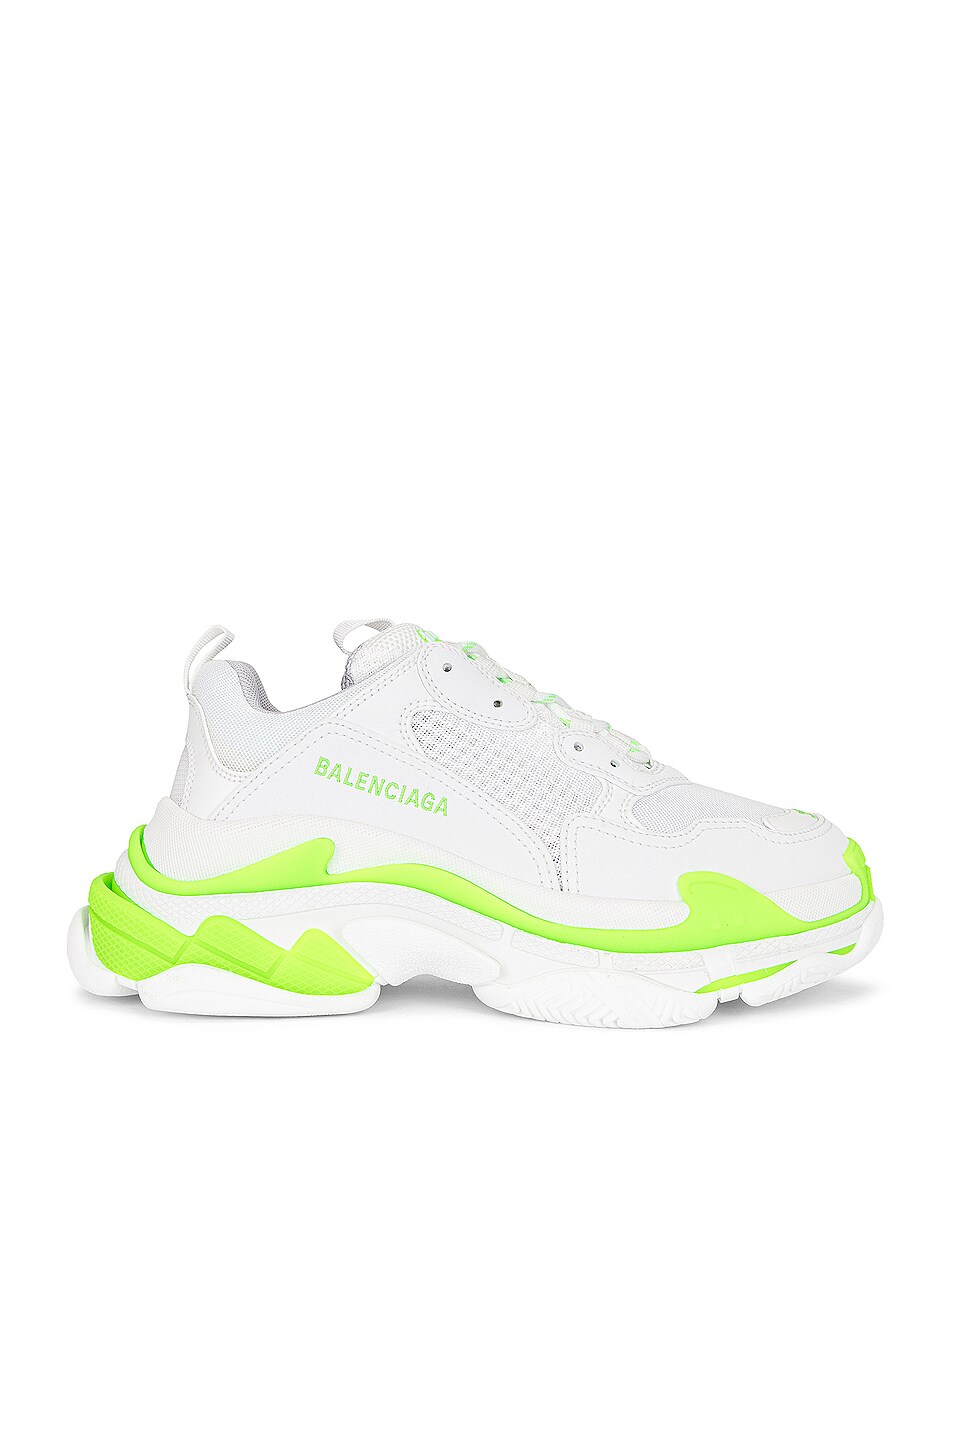 Image 1 of Balenciaga Triple S Sneakers in Fluo Green & White & Grey